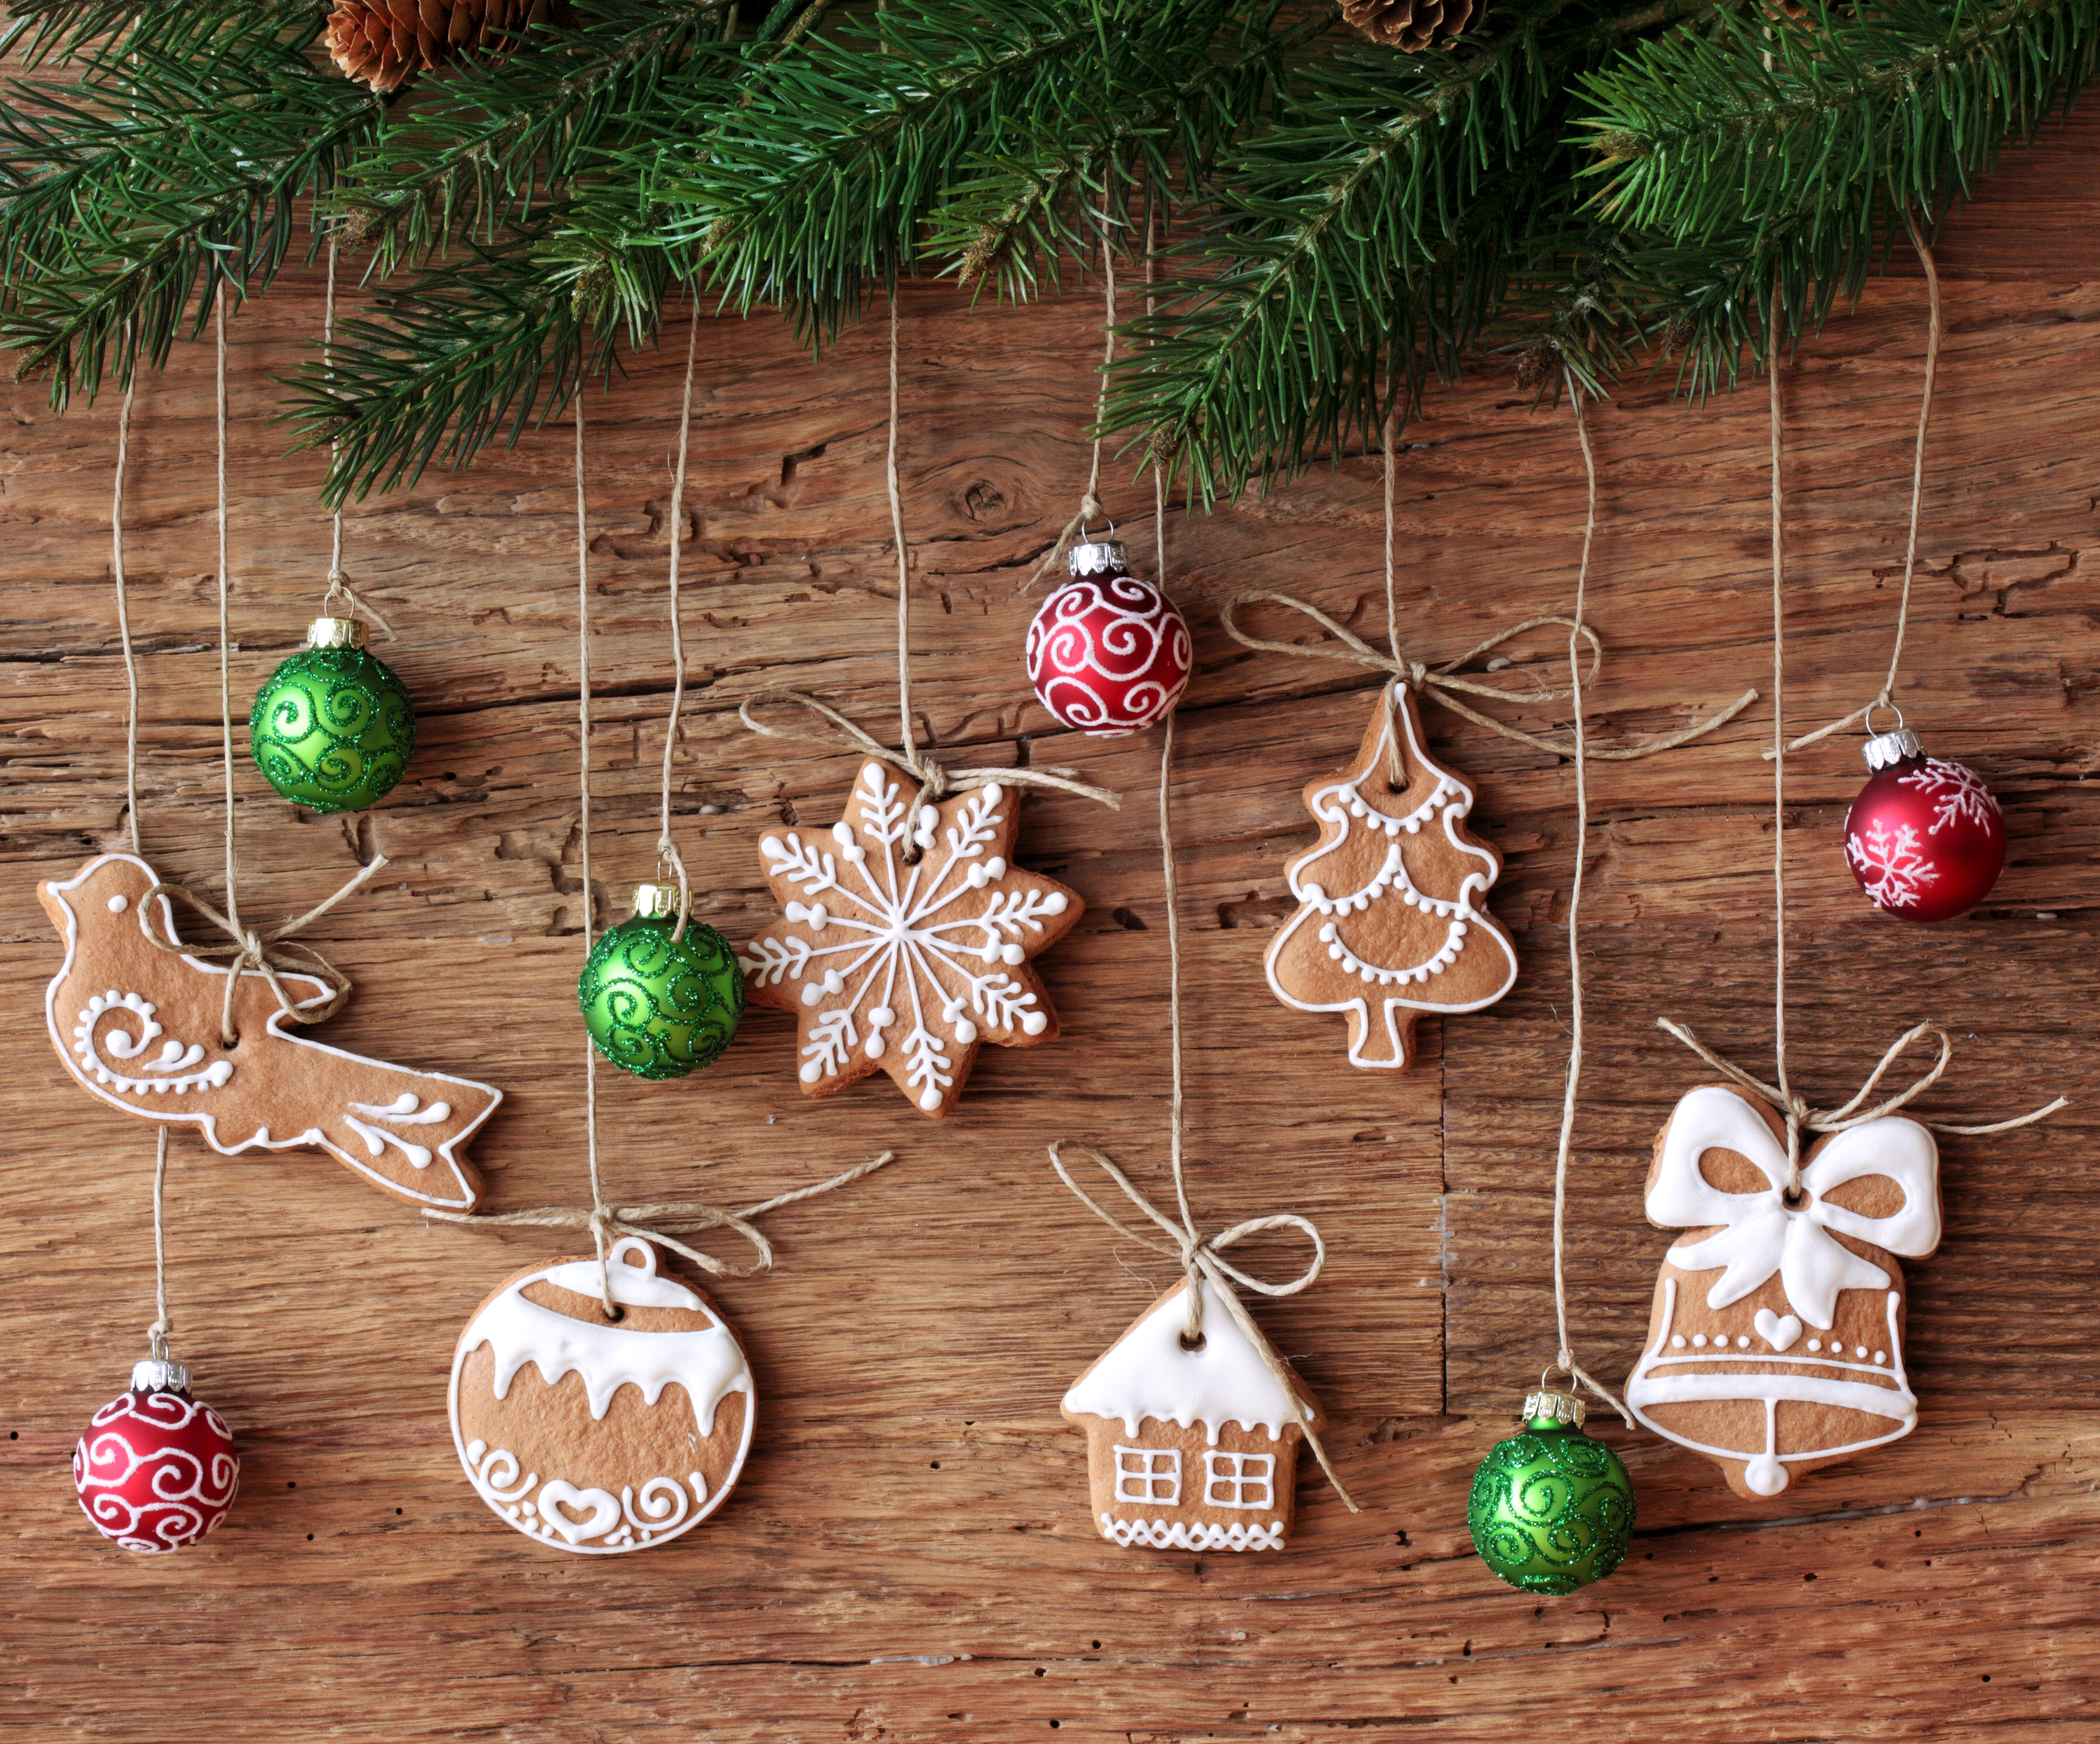 Christmas Christmas Ornaments Cookie Gingerbread Holiday 7224x6000